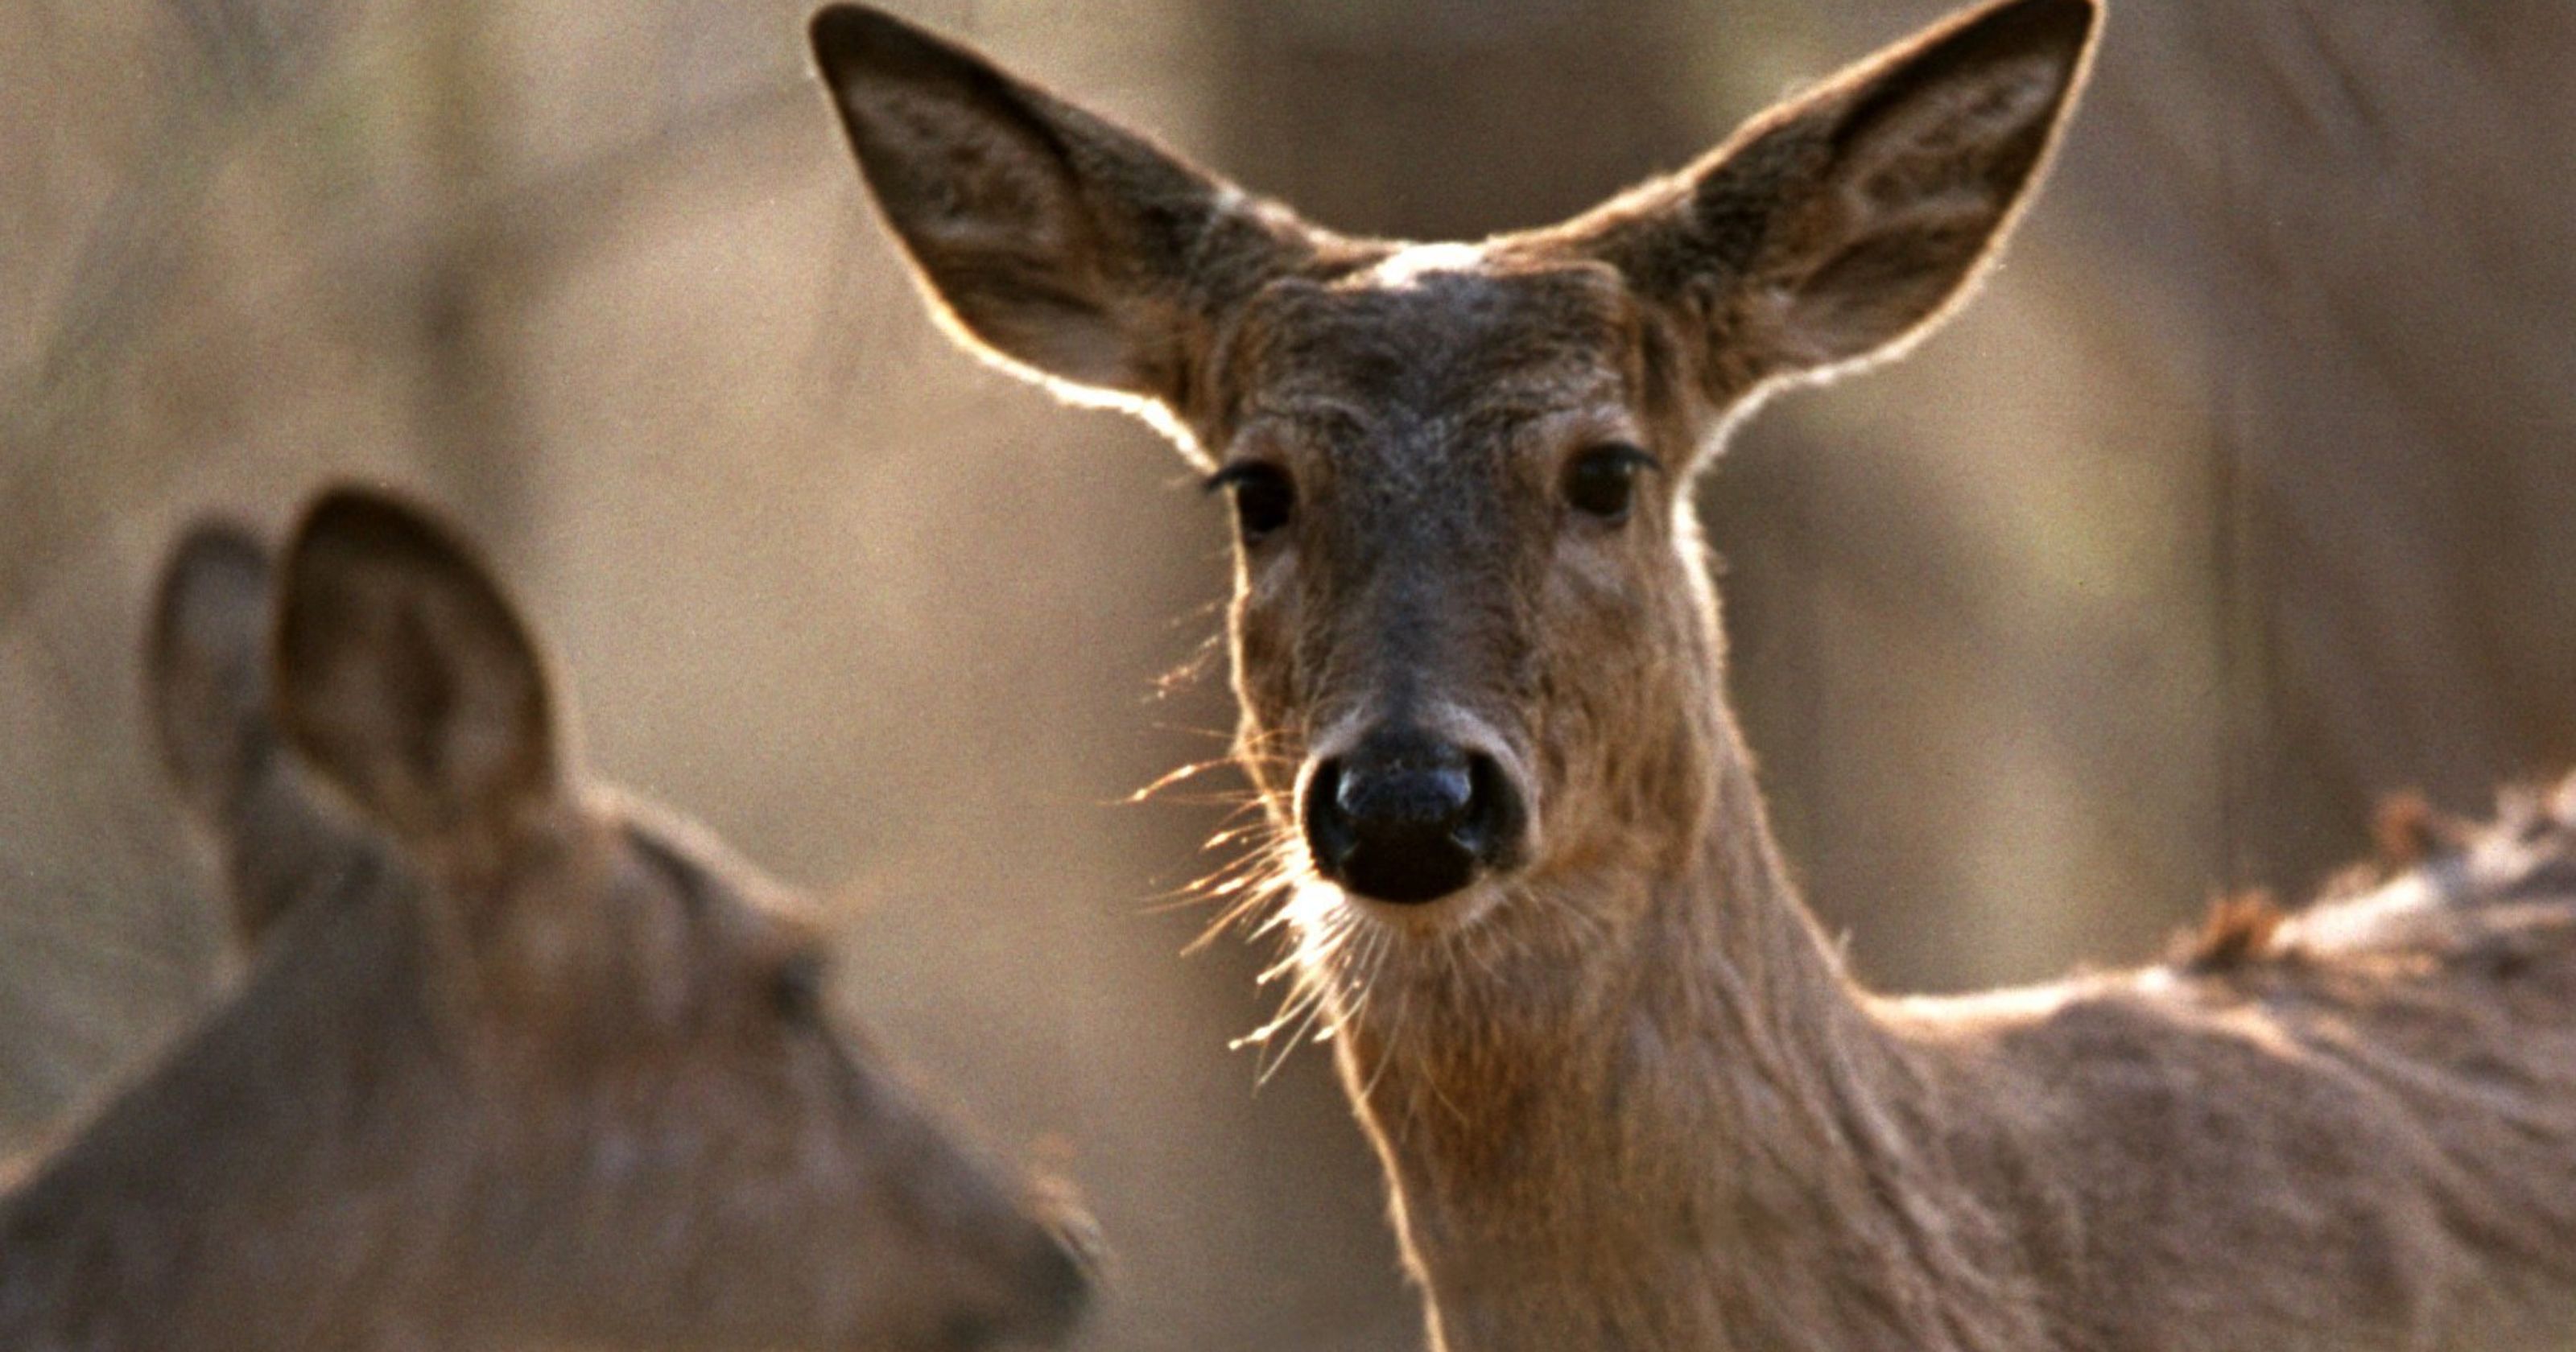 How to control those deer overrunning Detroit suburbs?